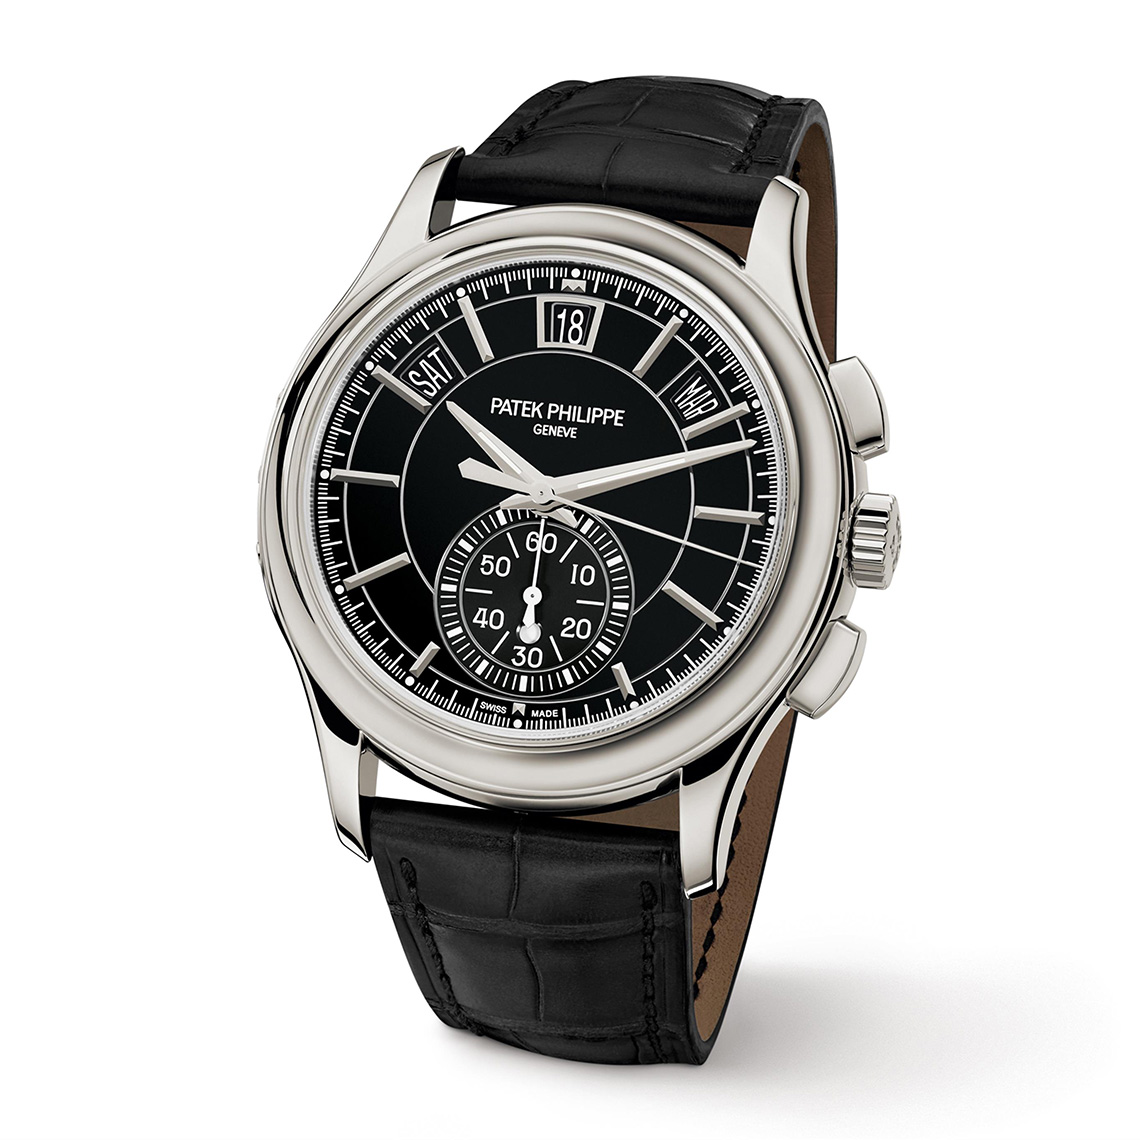 COMPLICATIONS SELF-WINDING - FLYBACK CHRONOGRAPH, ANNUAL CALENDAR